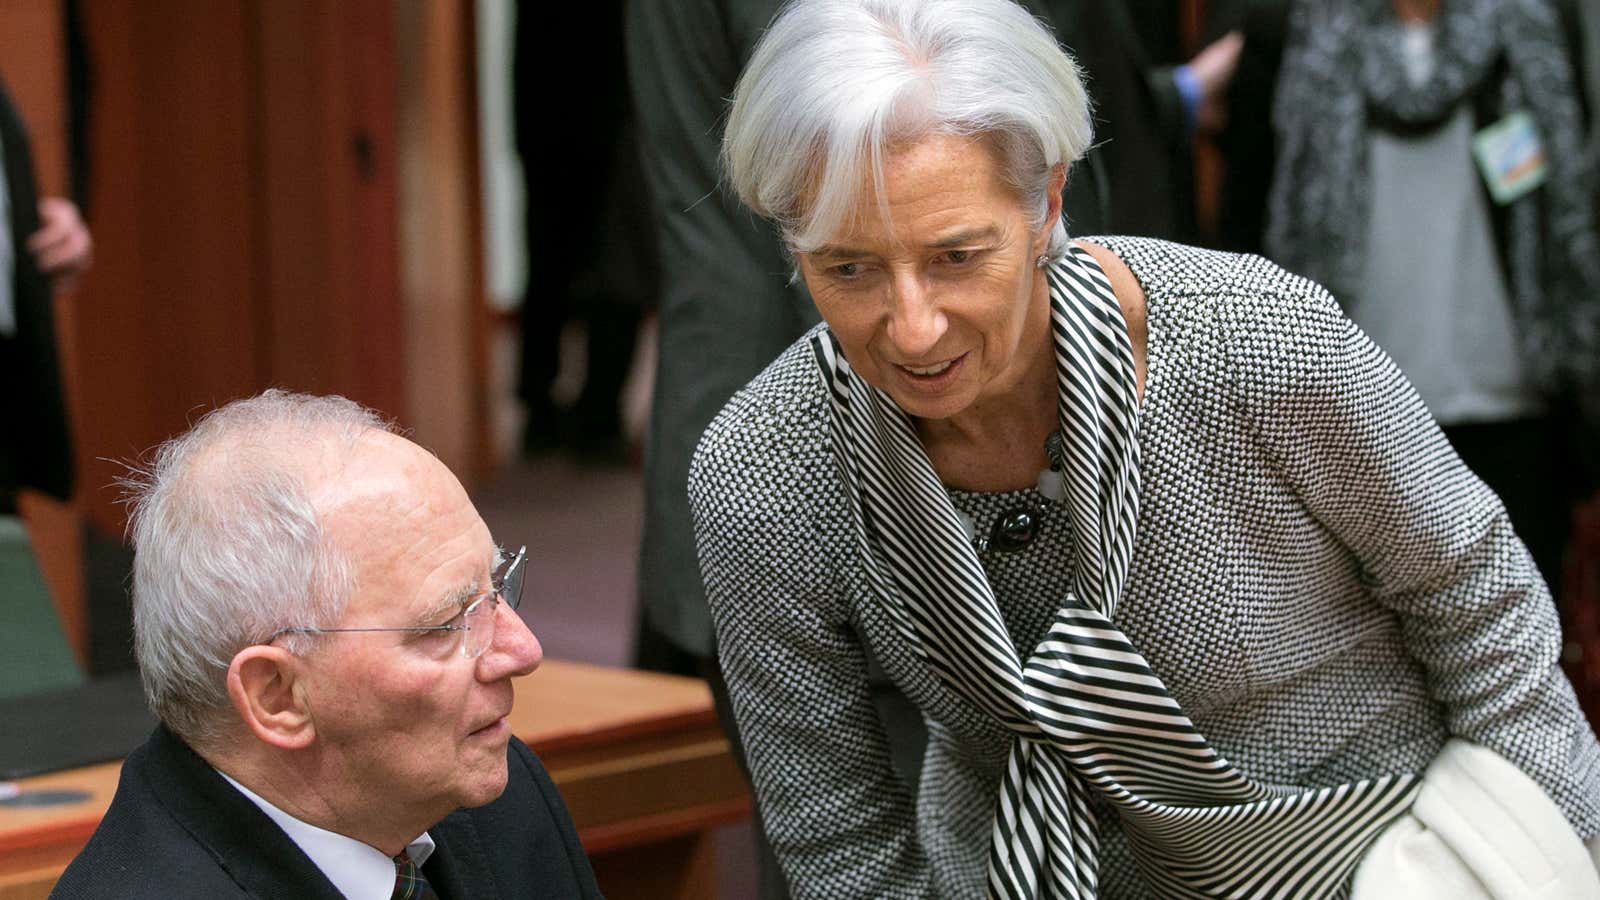 Wolfgang Schaueble and IMF chief Christine Lagarde talk EU bailouts in 2015.